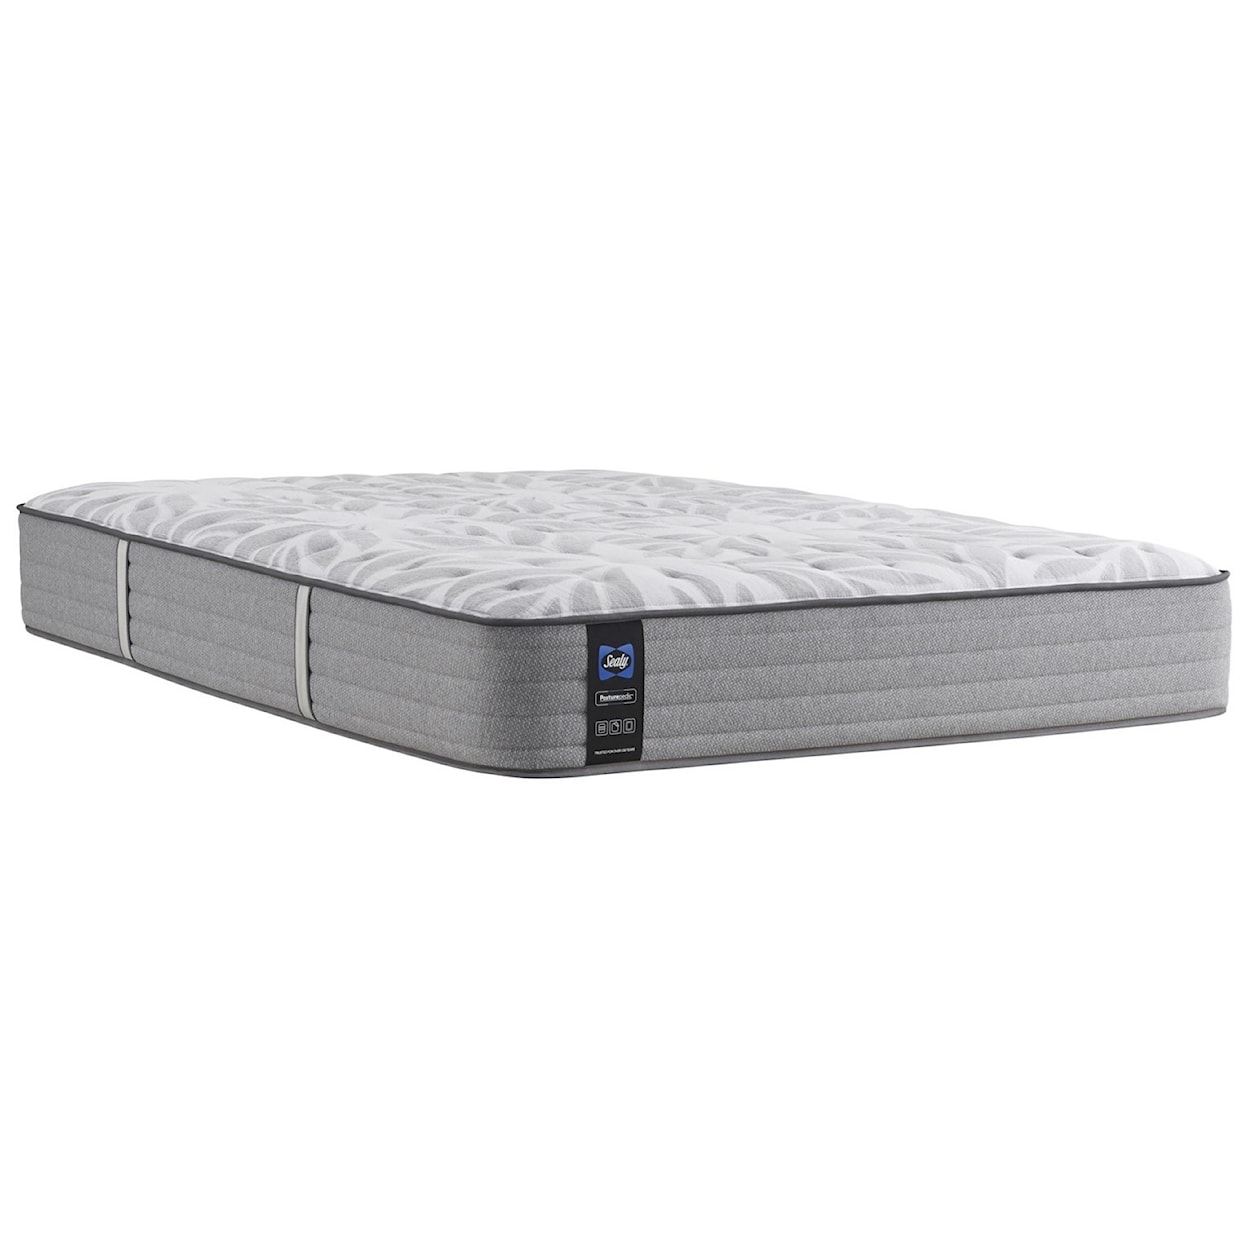 Sealy PPS5 Posturpedic Innerspring Soft TT Cal King 12 1/2" Soft Tight Top Mattress